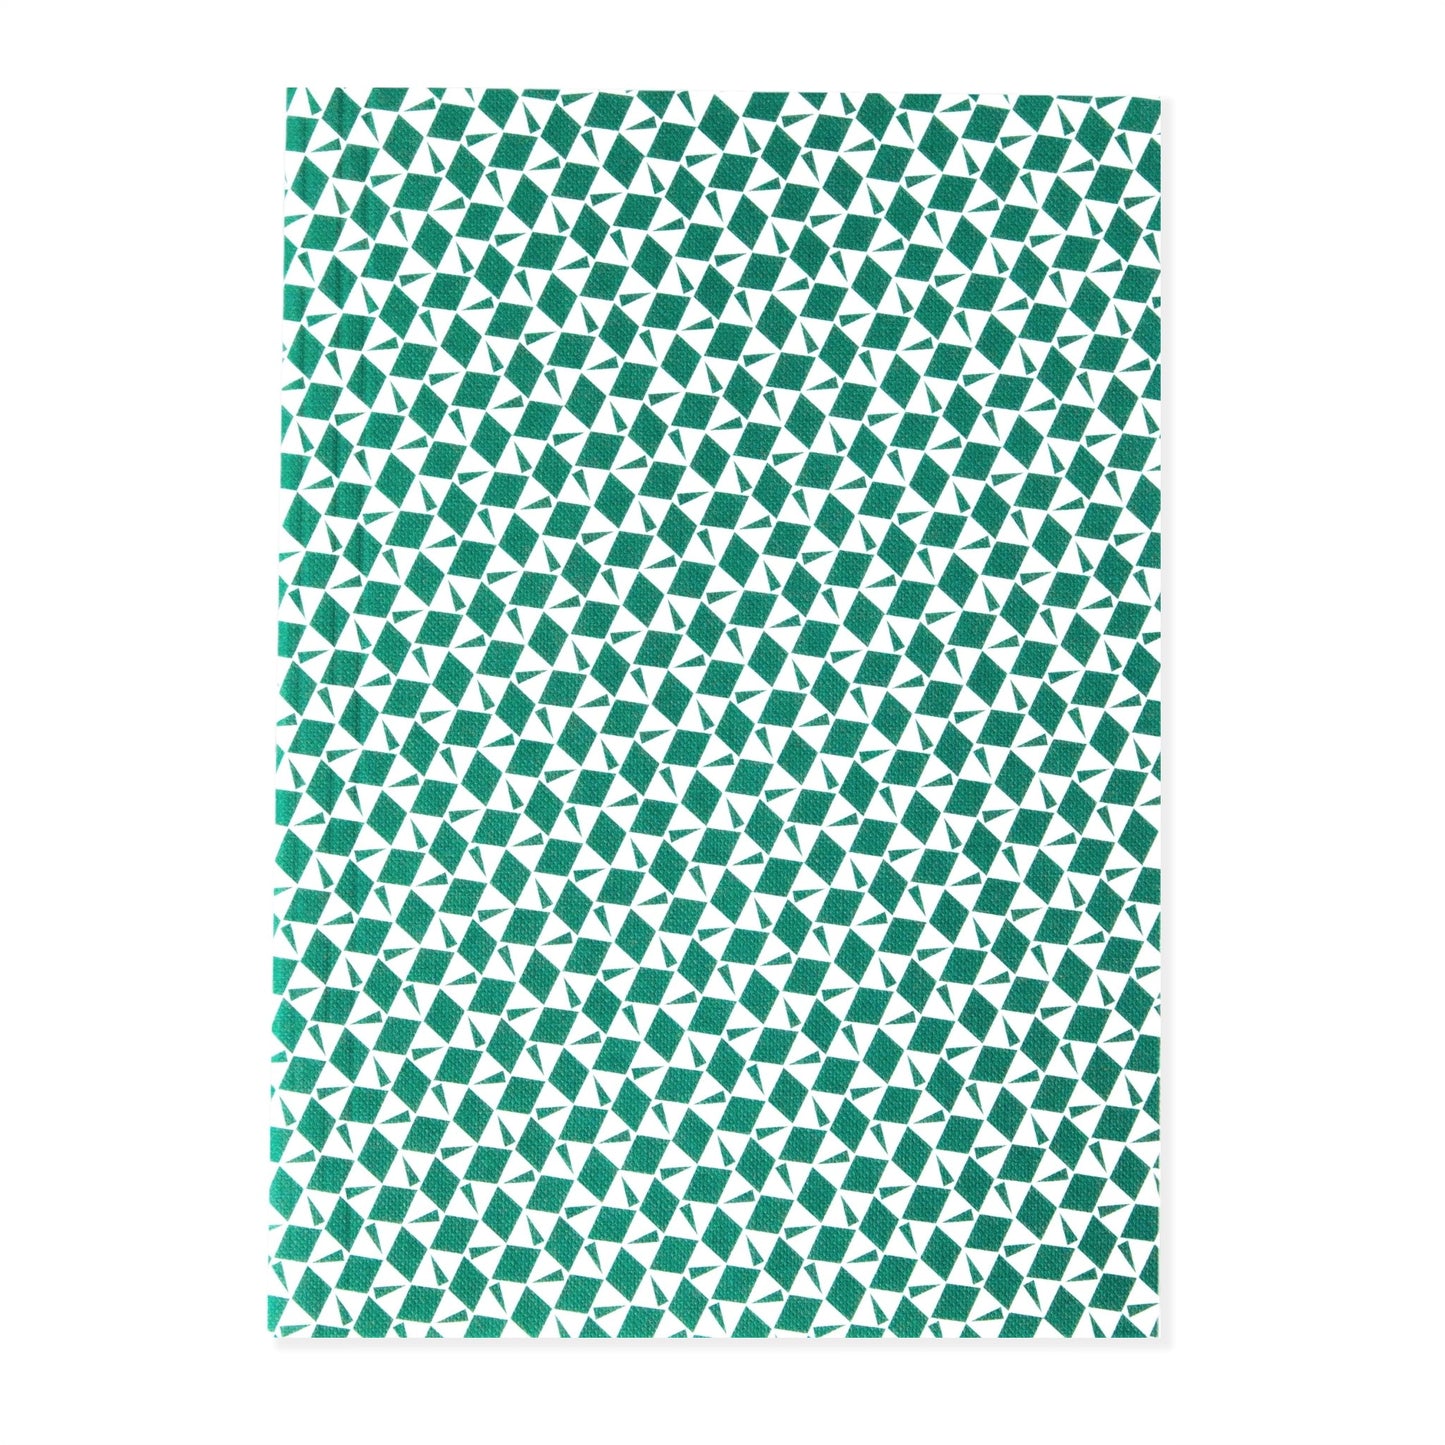 A5 softback notebook with geometric emerald green and white repeat diamond and triangles patterned cover. Dotted inner pages